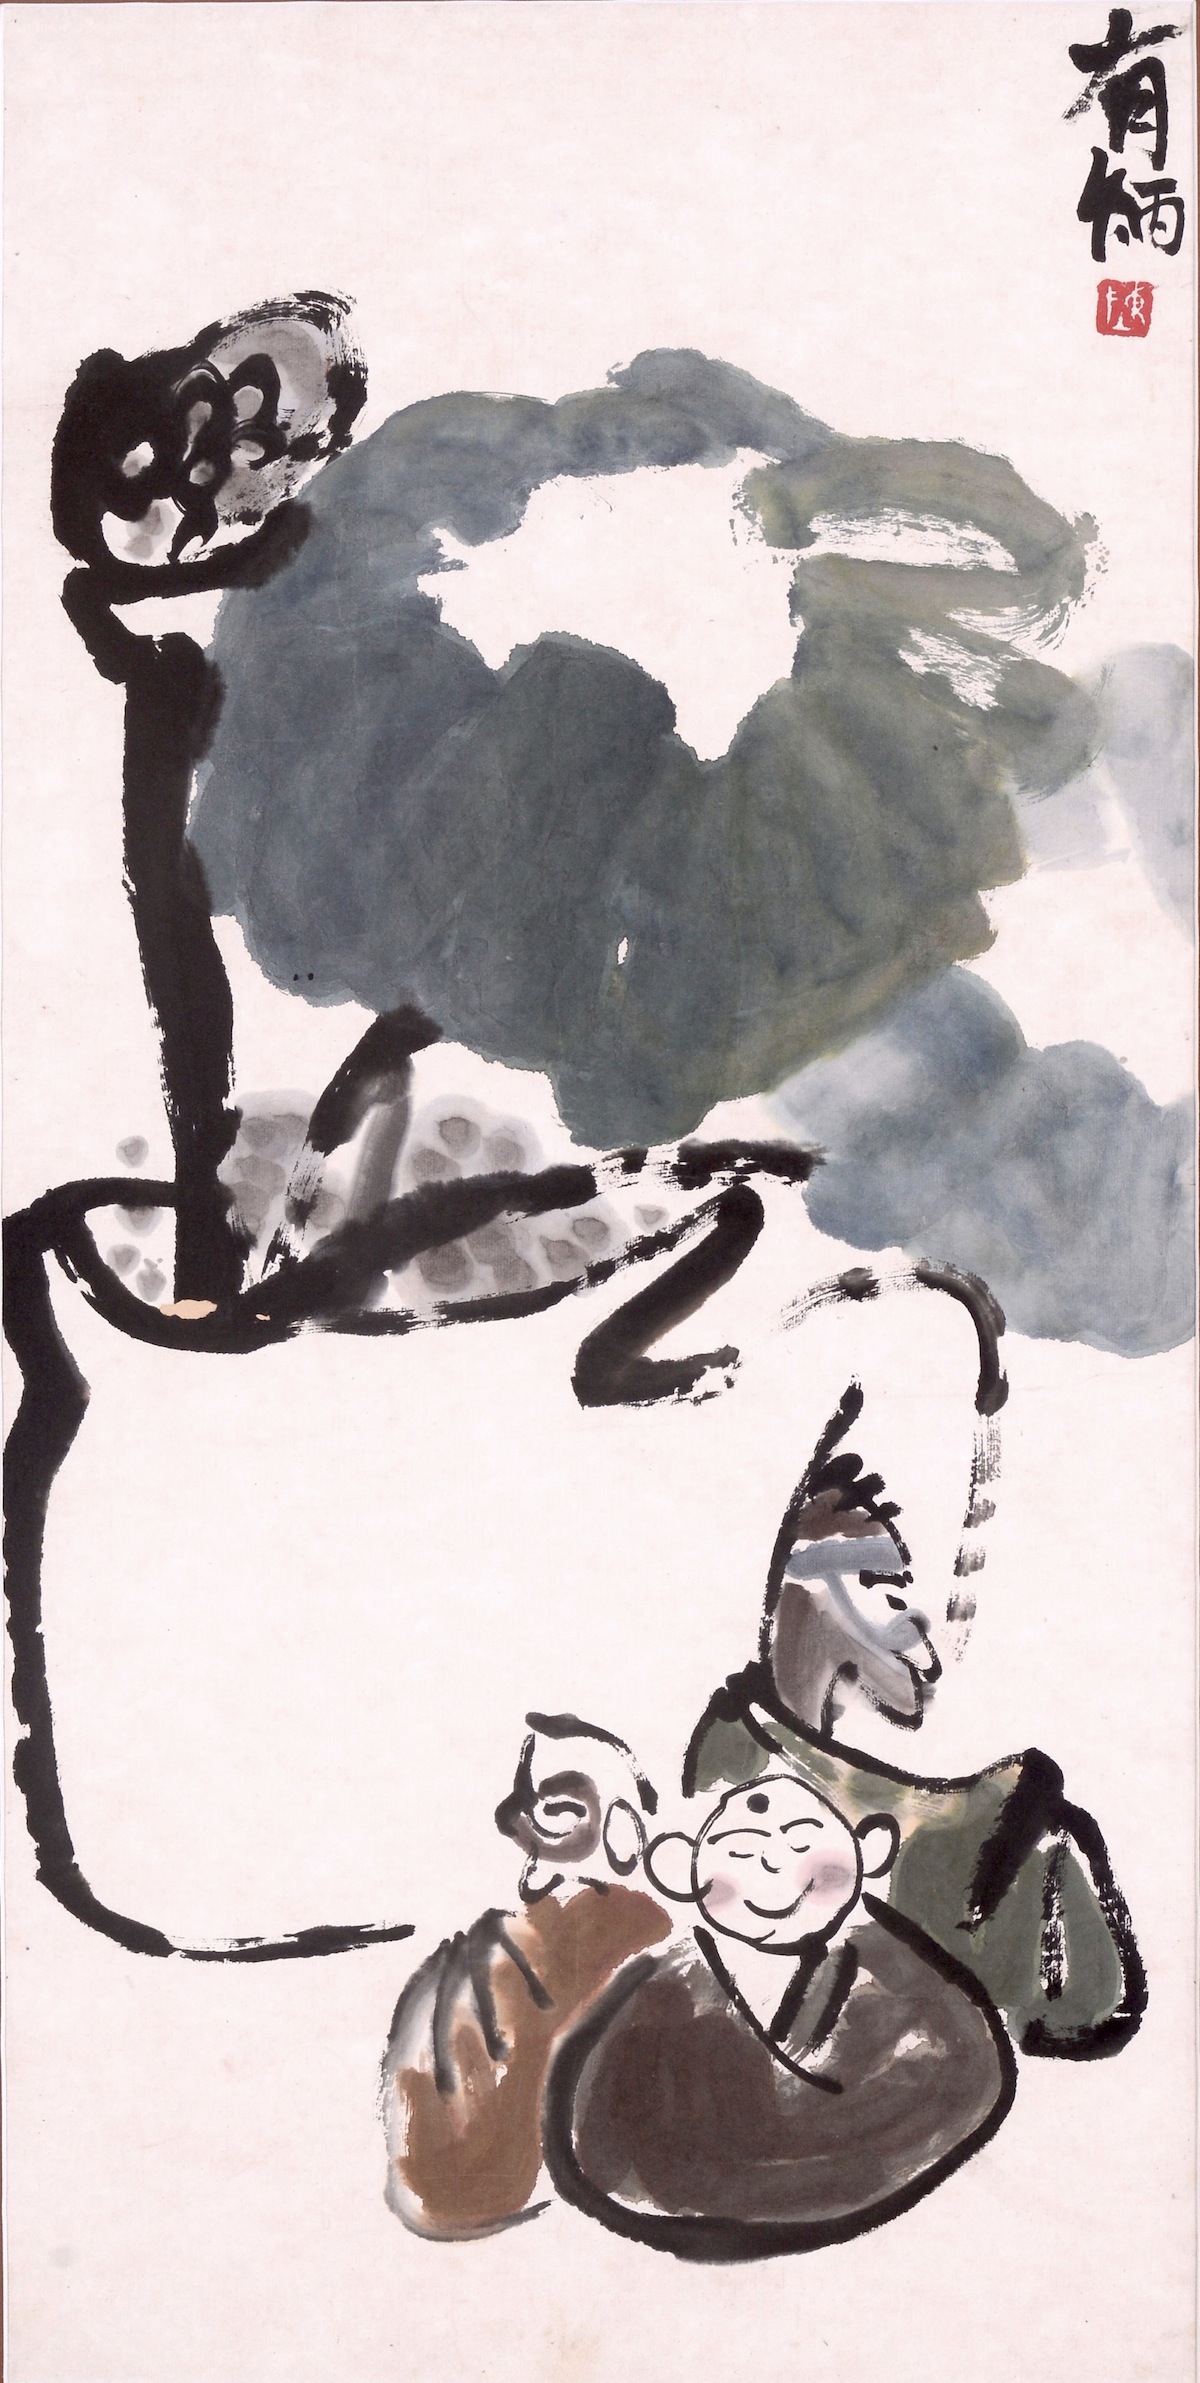 Tan Oe Pang (b.1947). Buddha and Lotus, undated. Ink and colour on paper, 69 x 36 cm (http://www.asiaartcollective.com/)